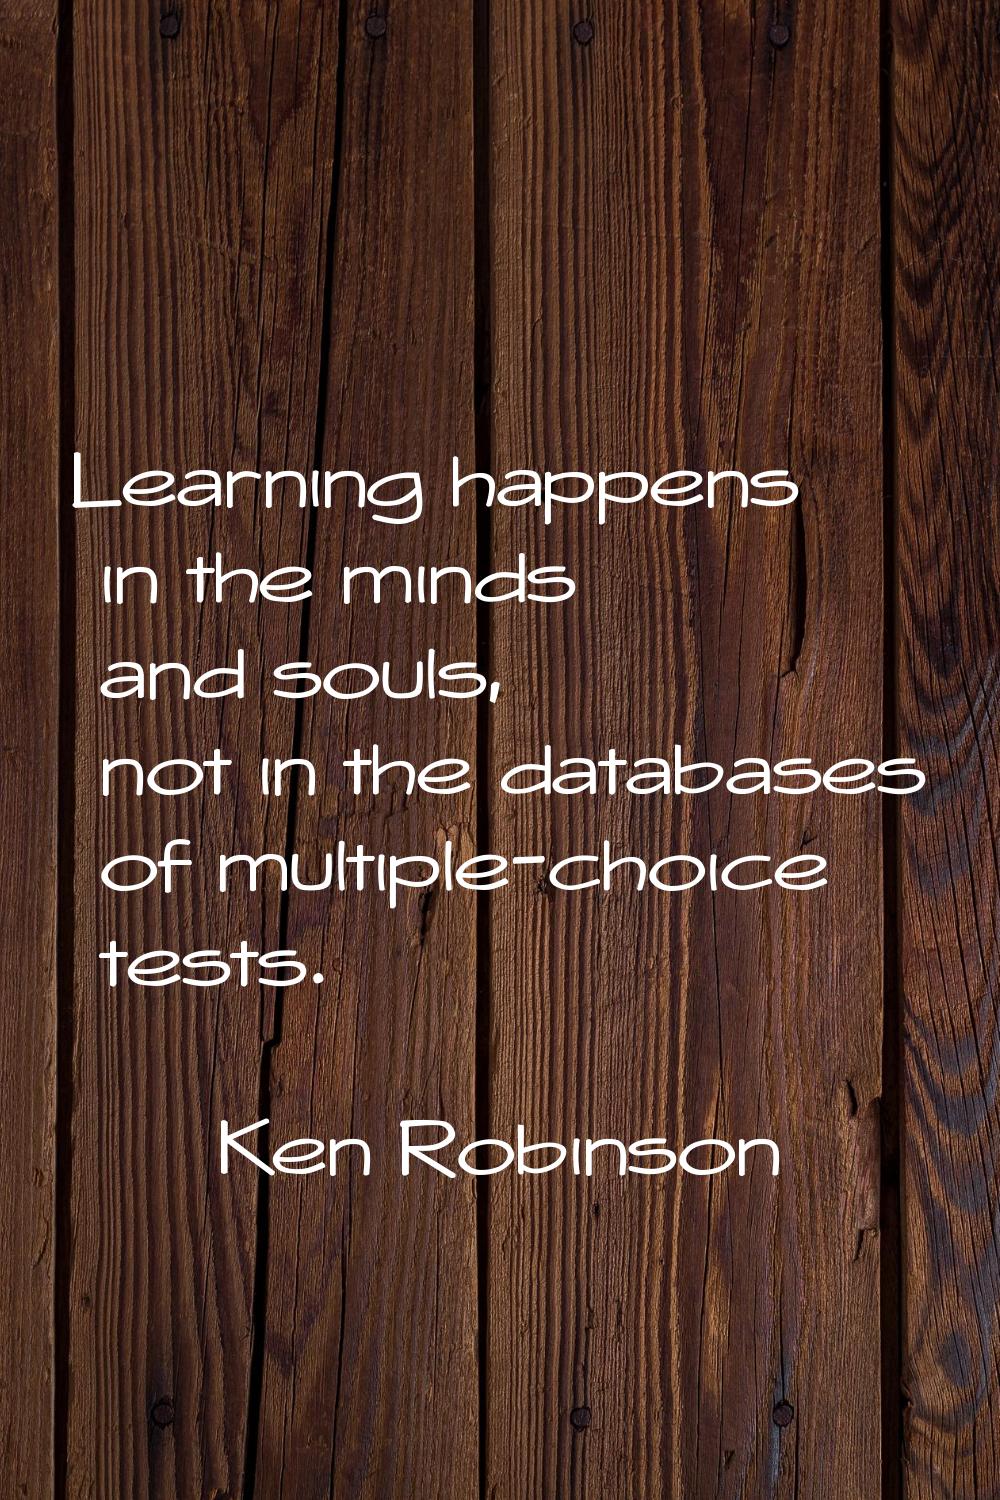 Learning happens in the minds and souls, not in the databases of multiple-choice tests.